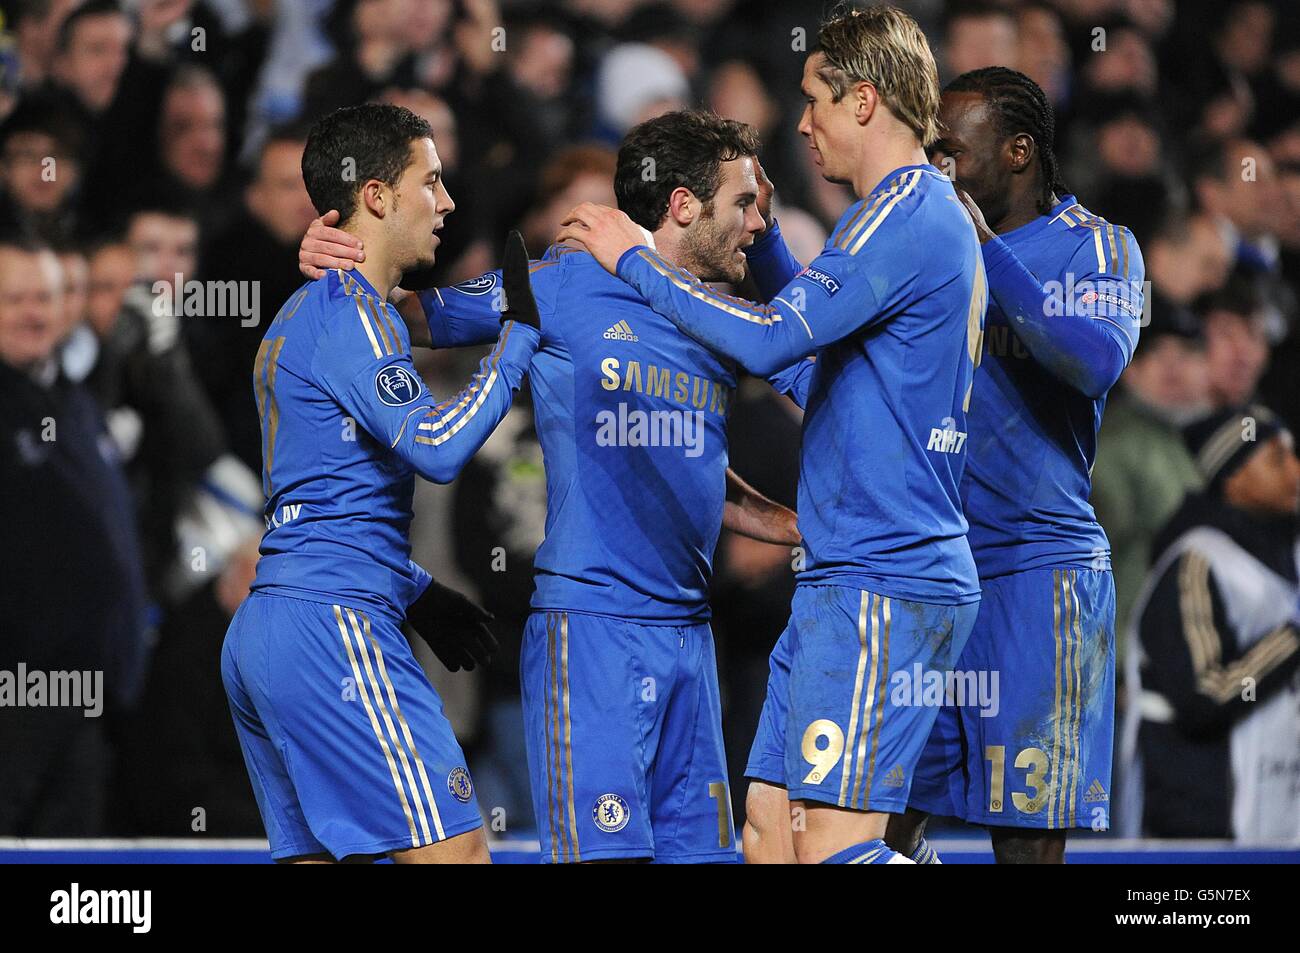 Chelsea's Juan Mata (centre) celebrates scoring their fifth goal of the game with team-mates Stock Photo